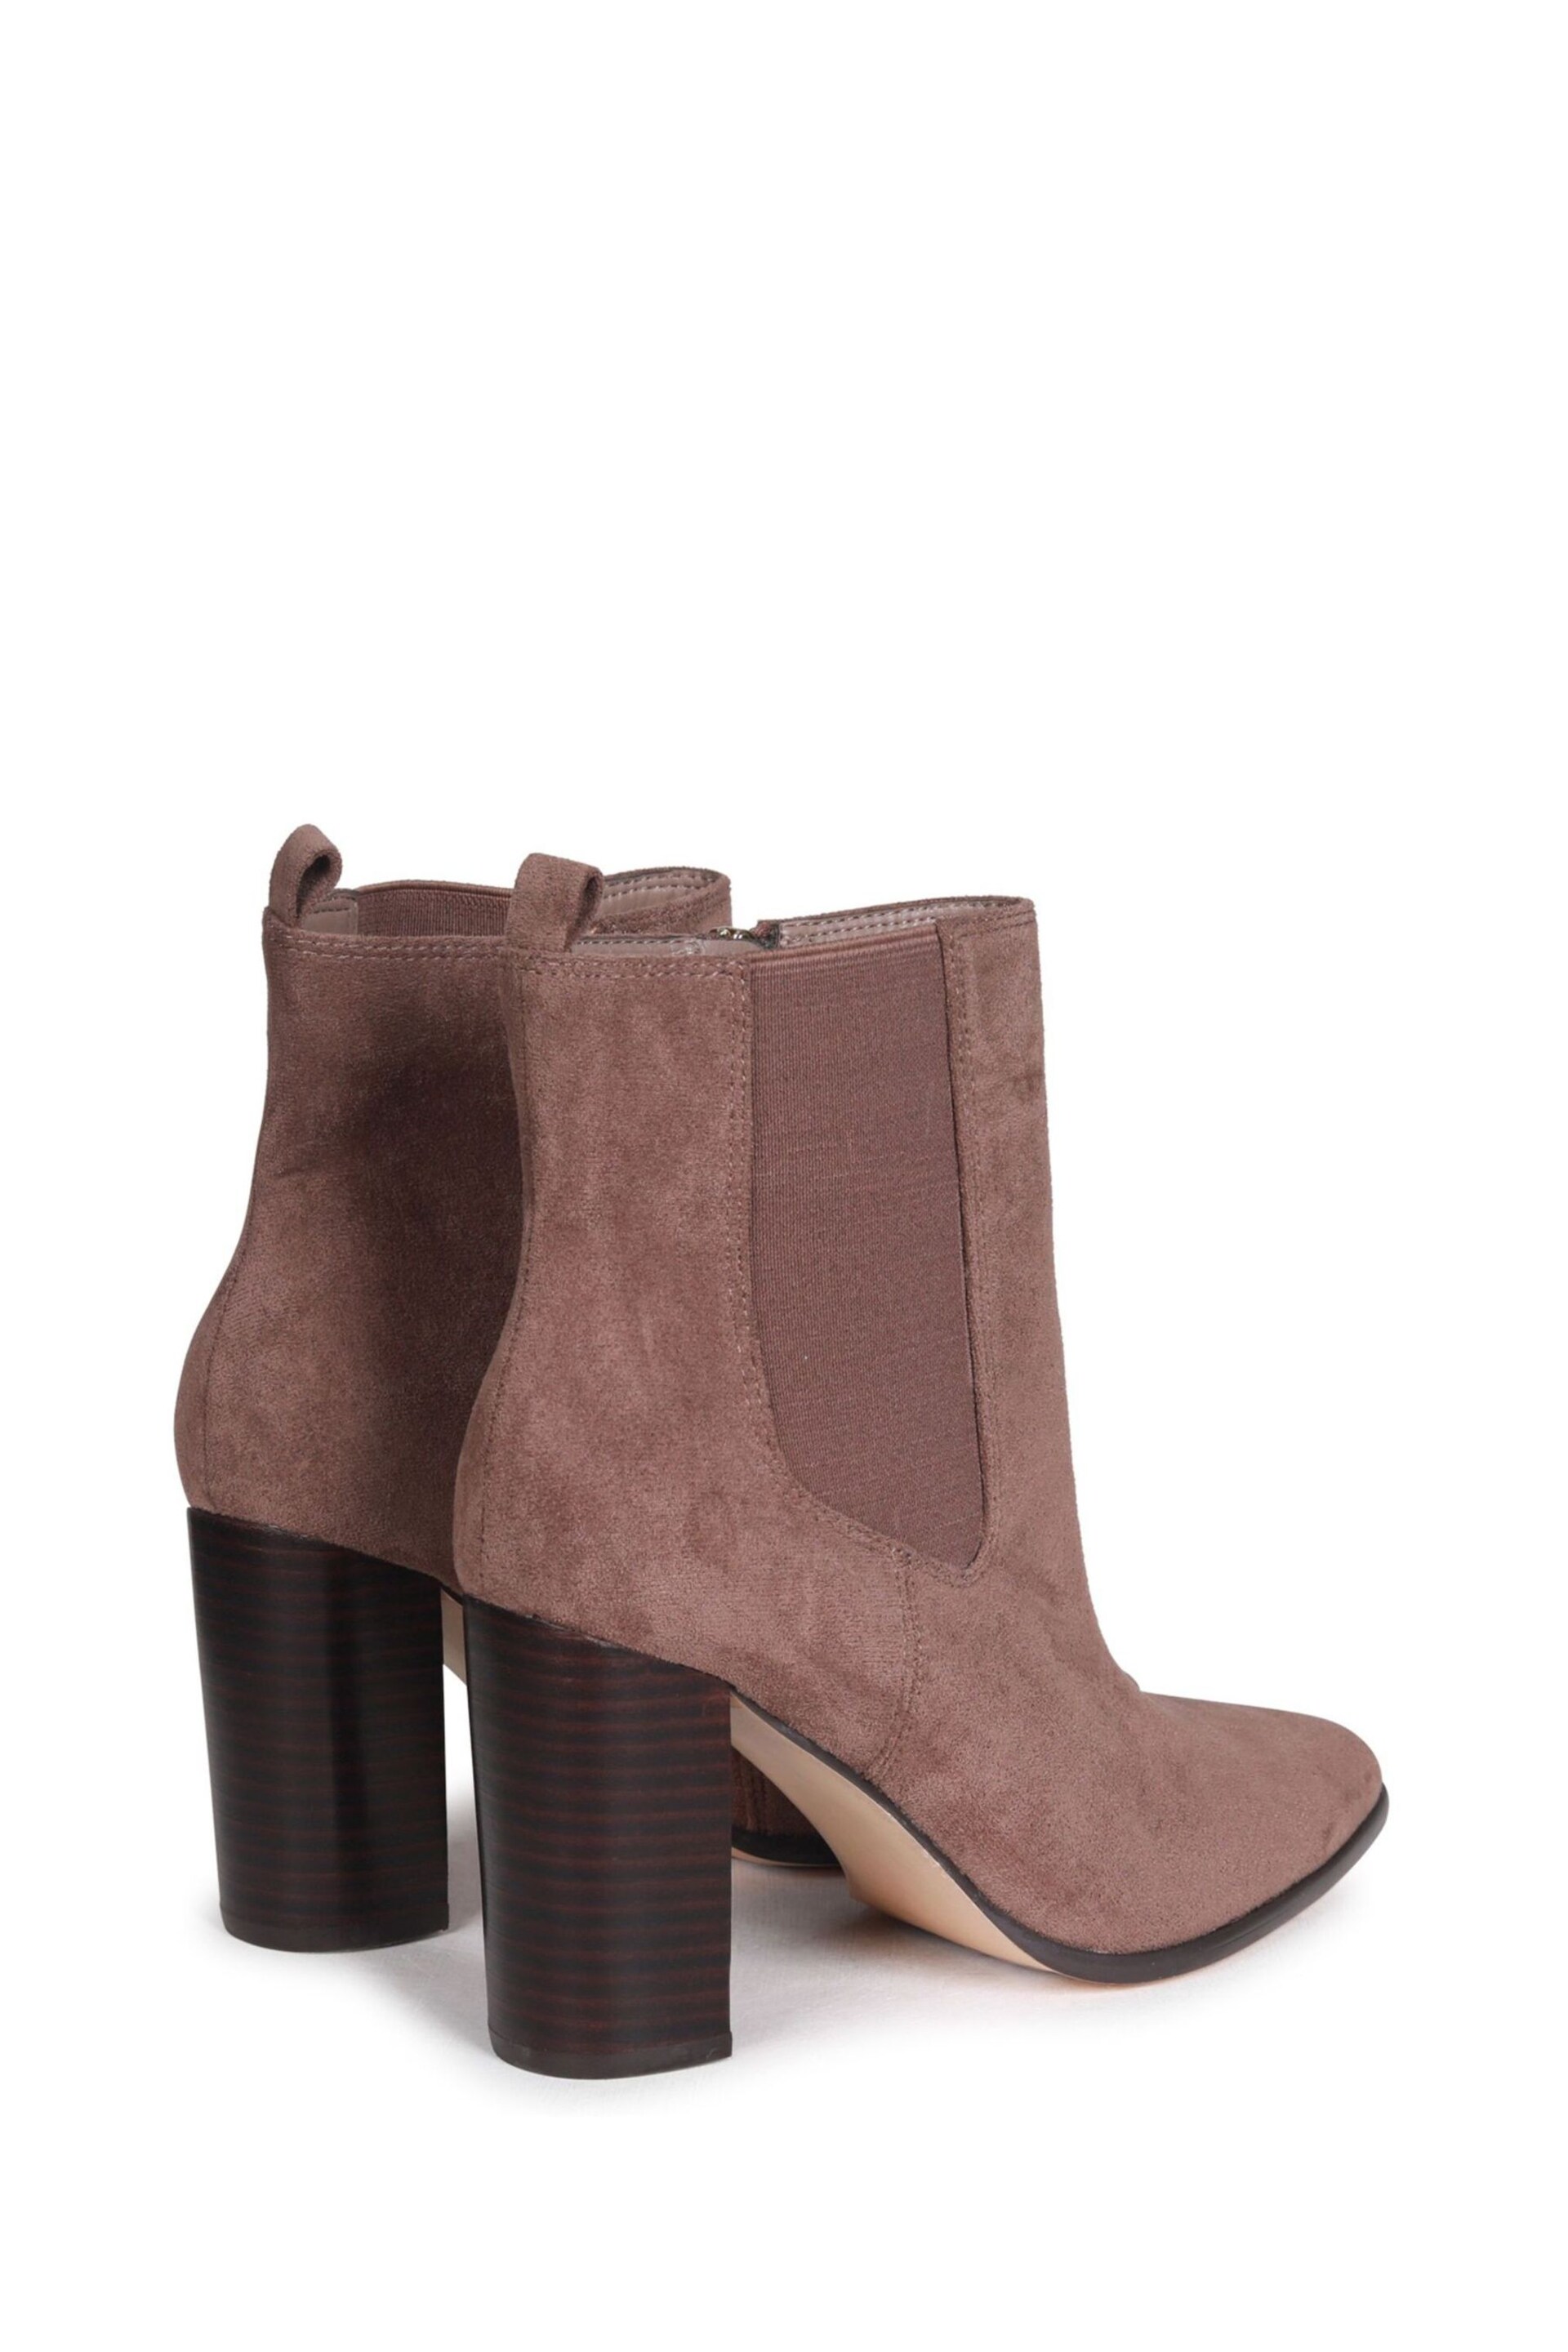 Linzi Brown Galore Block Heeled Pointed Toe Ankle Boots - Image 4 of 4